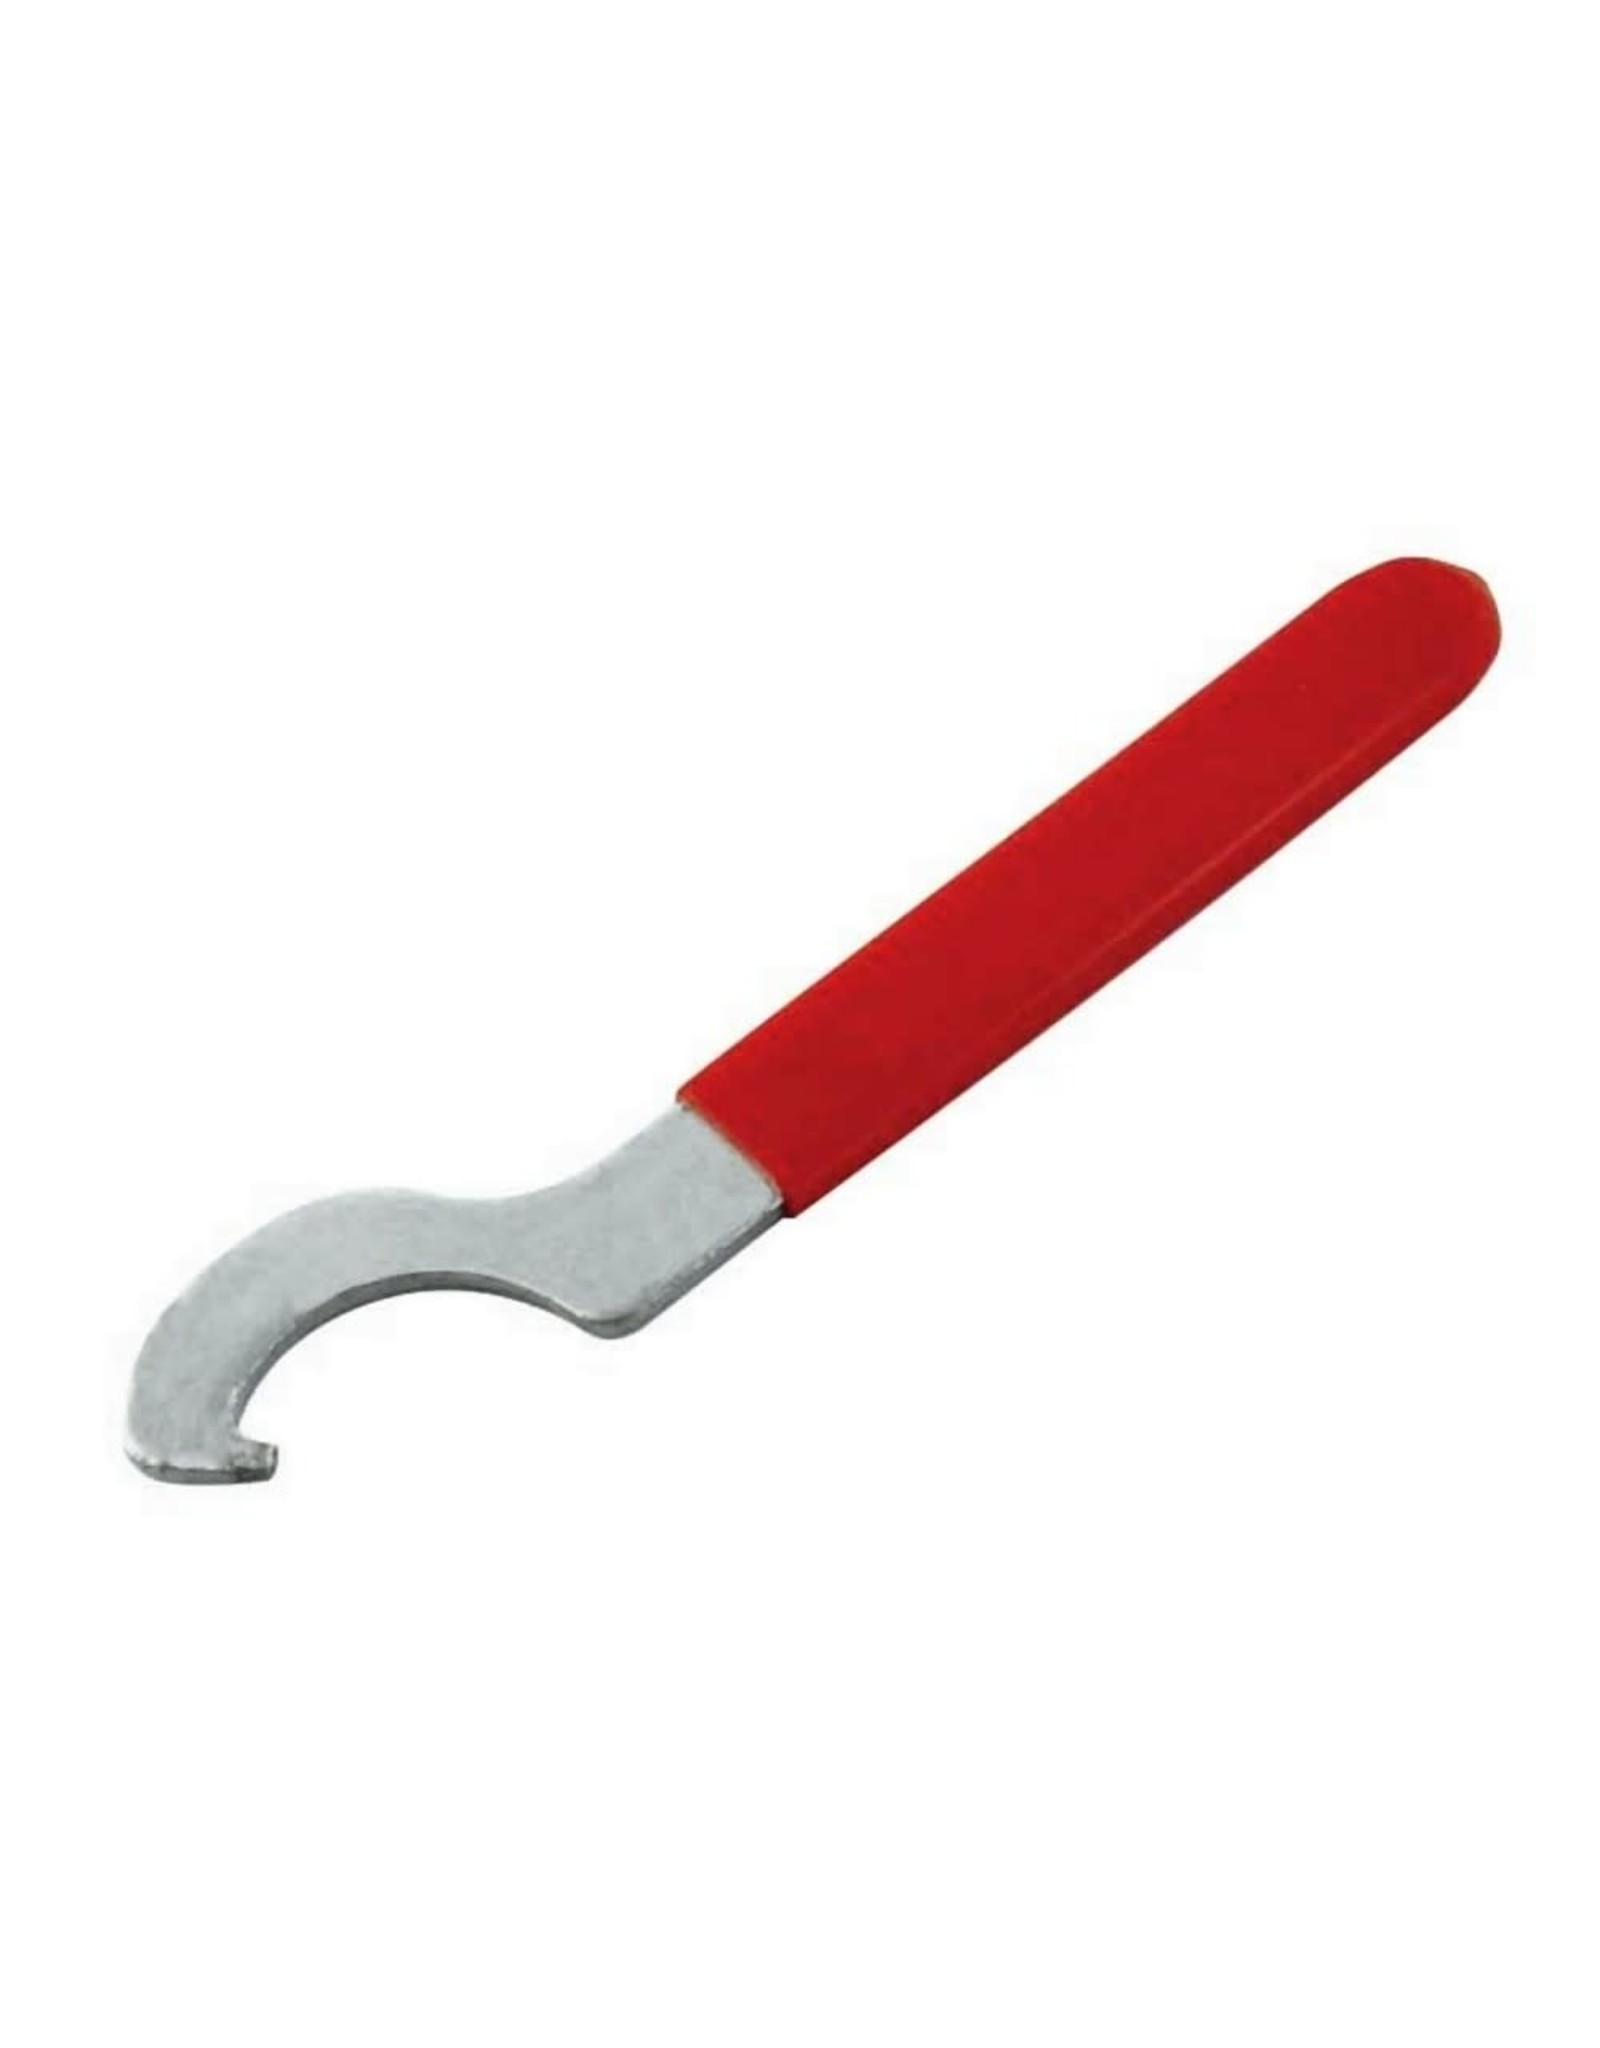 Faucet wrench Red Handle